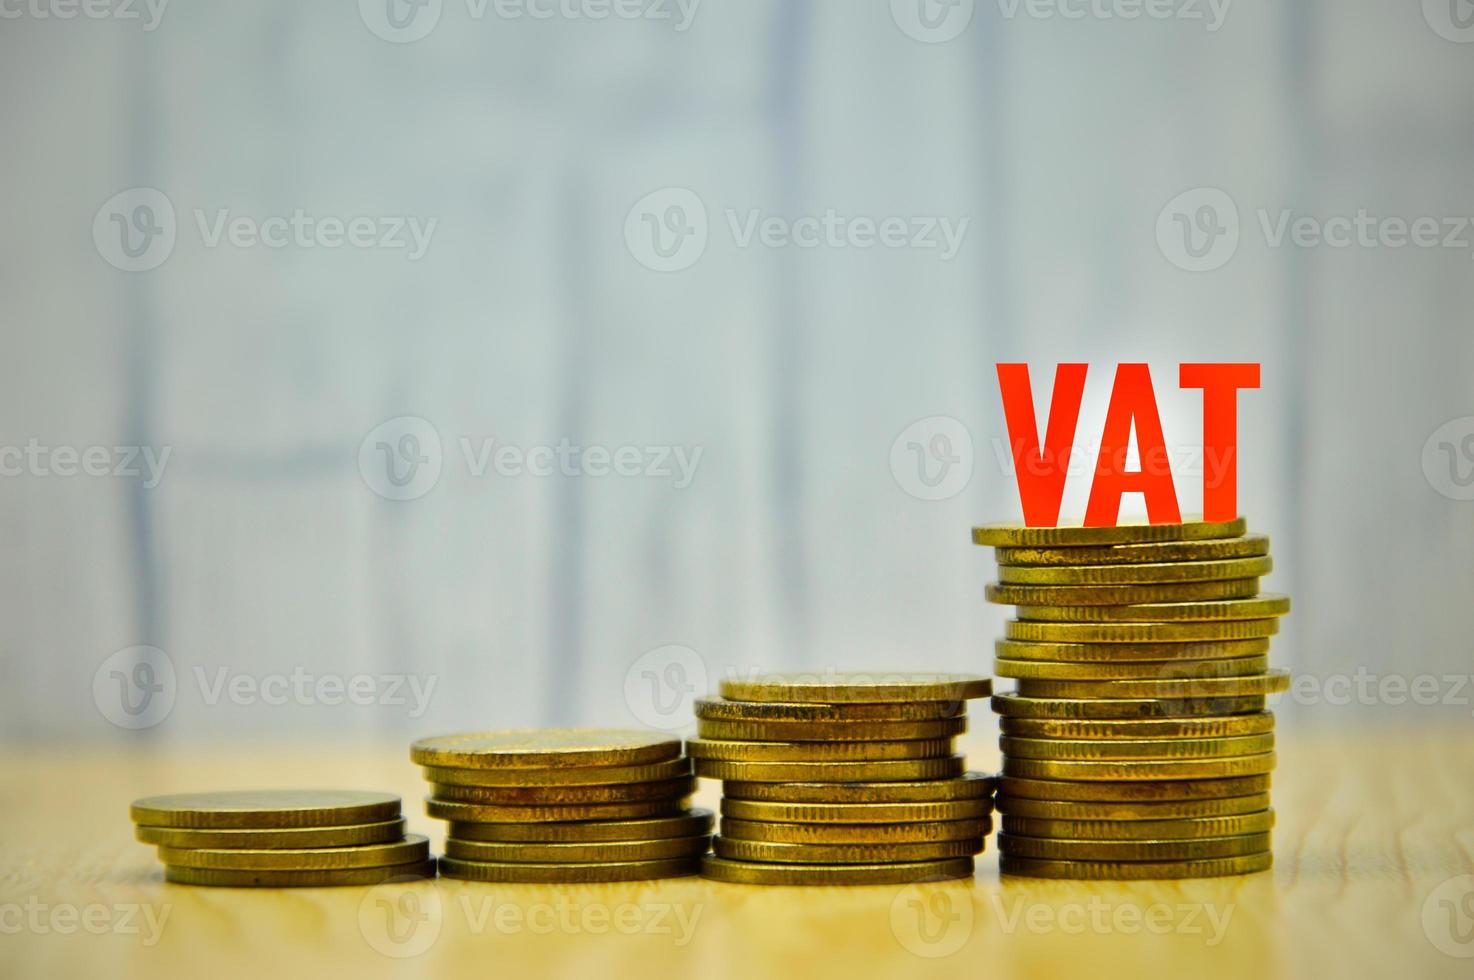 red vat on gold coins stacked on wooden background design template business finance banking income salary photo